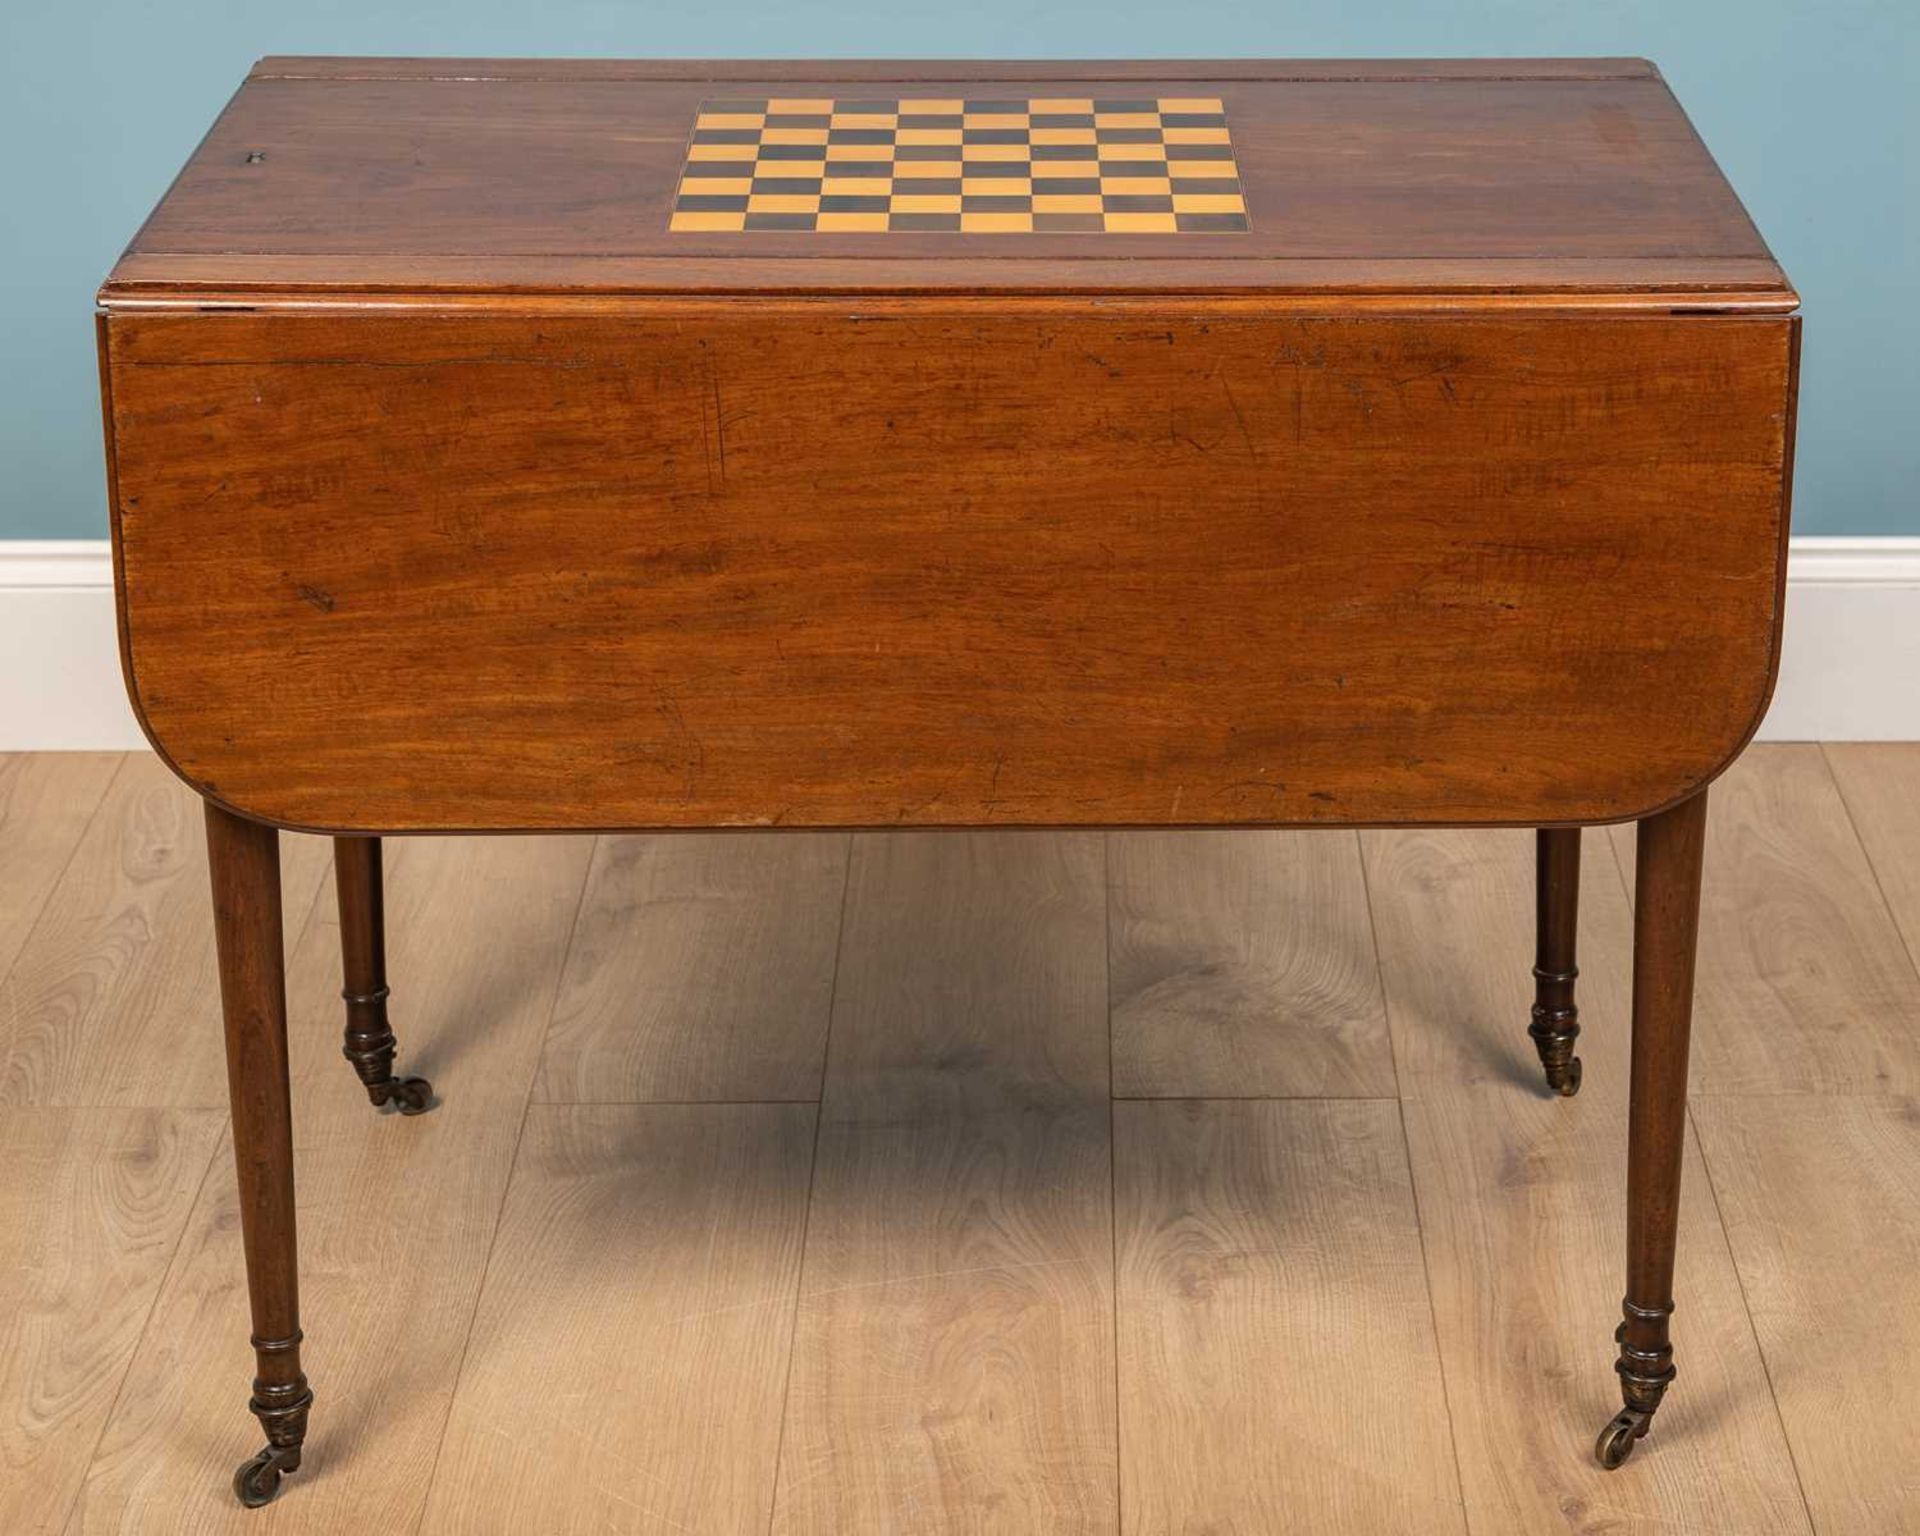 A George III mahogany games table with drop leaves - Image 2 of 9